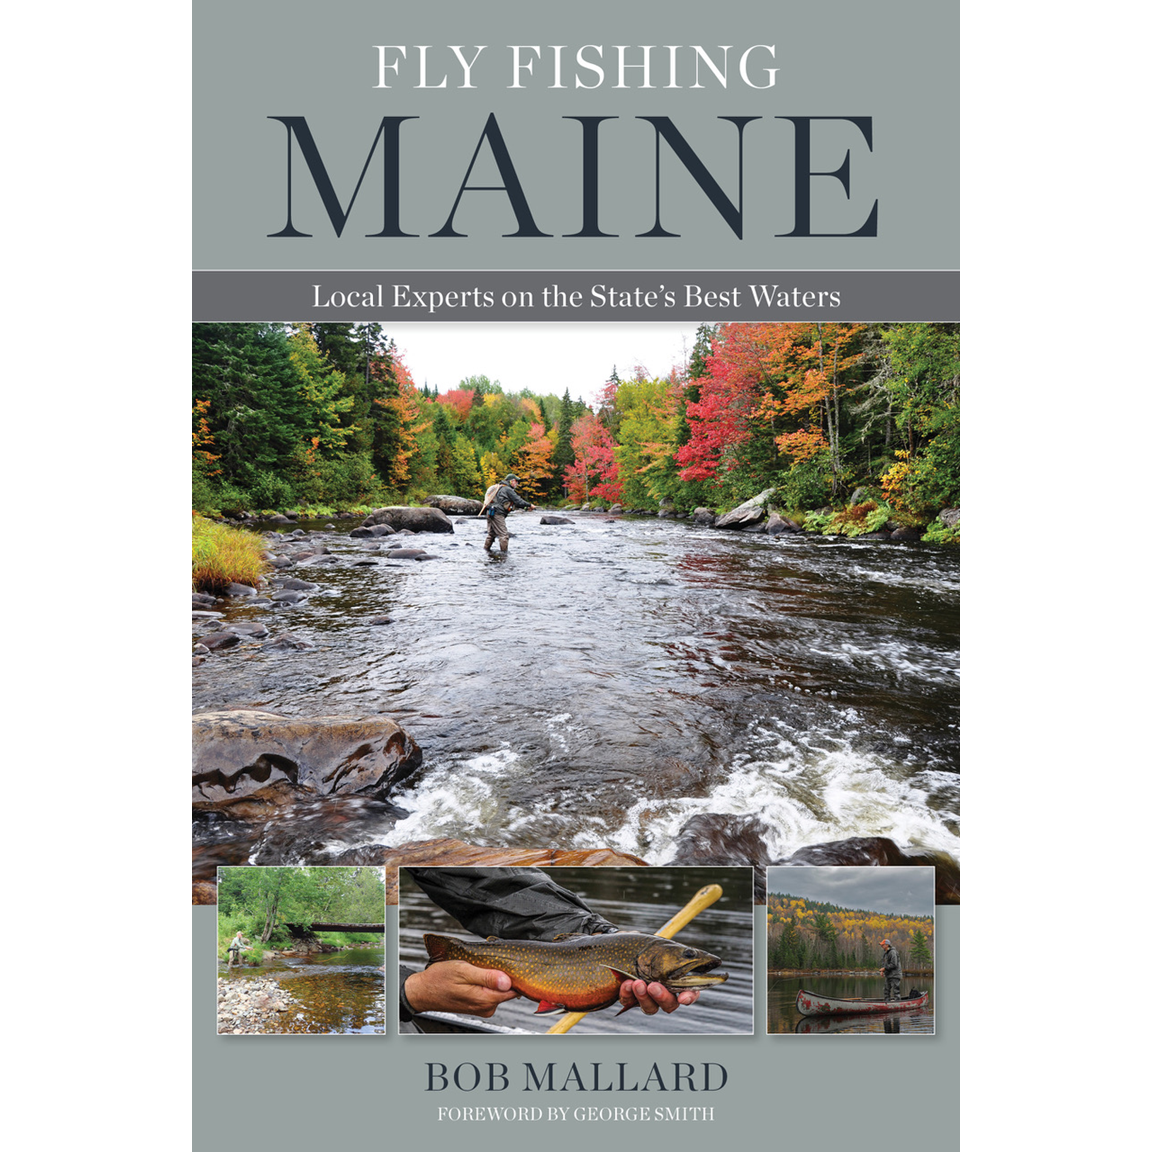 FLY FISHING MAINE: LOCAL EXPERTS ON THE STATE'S BEST WATERS (SIGNED)